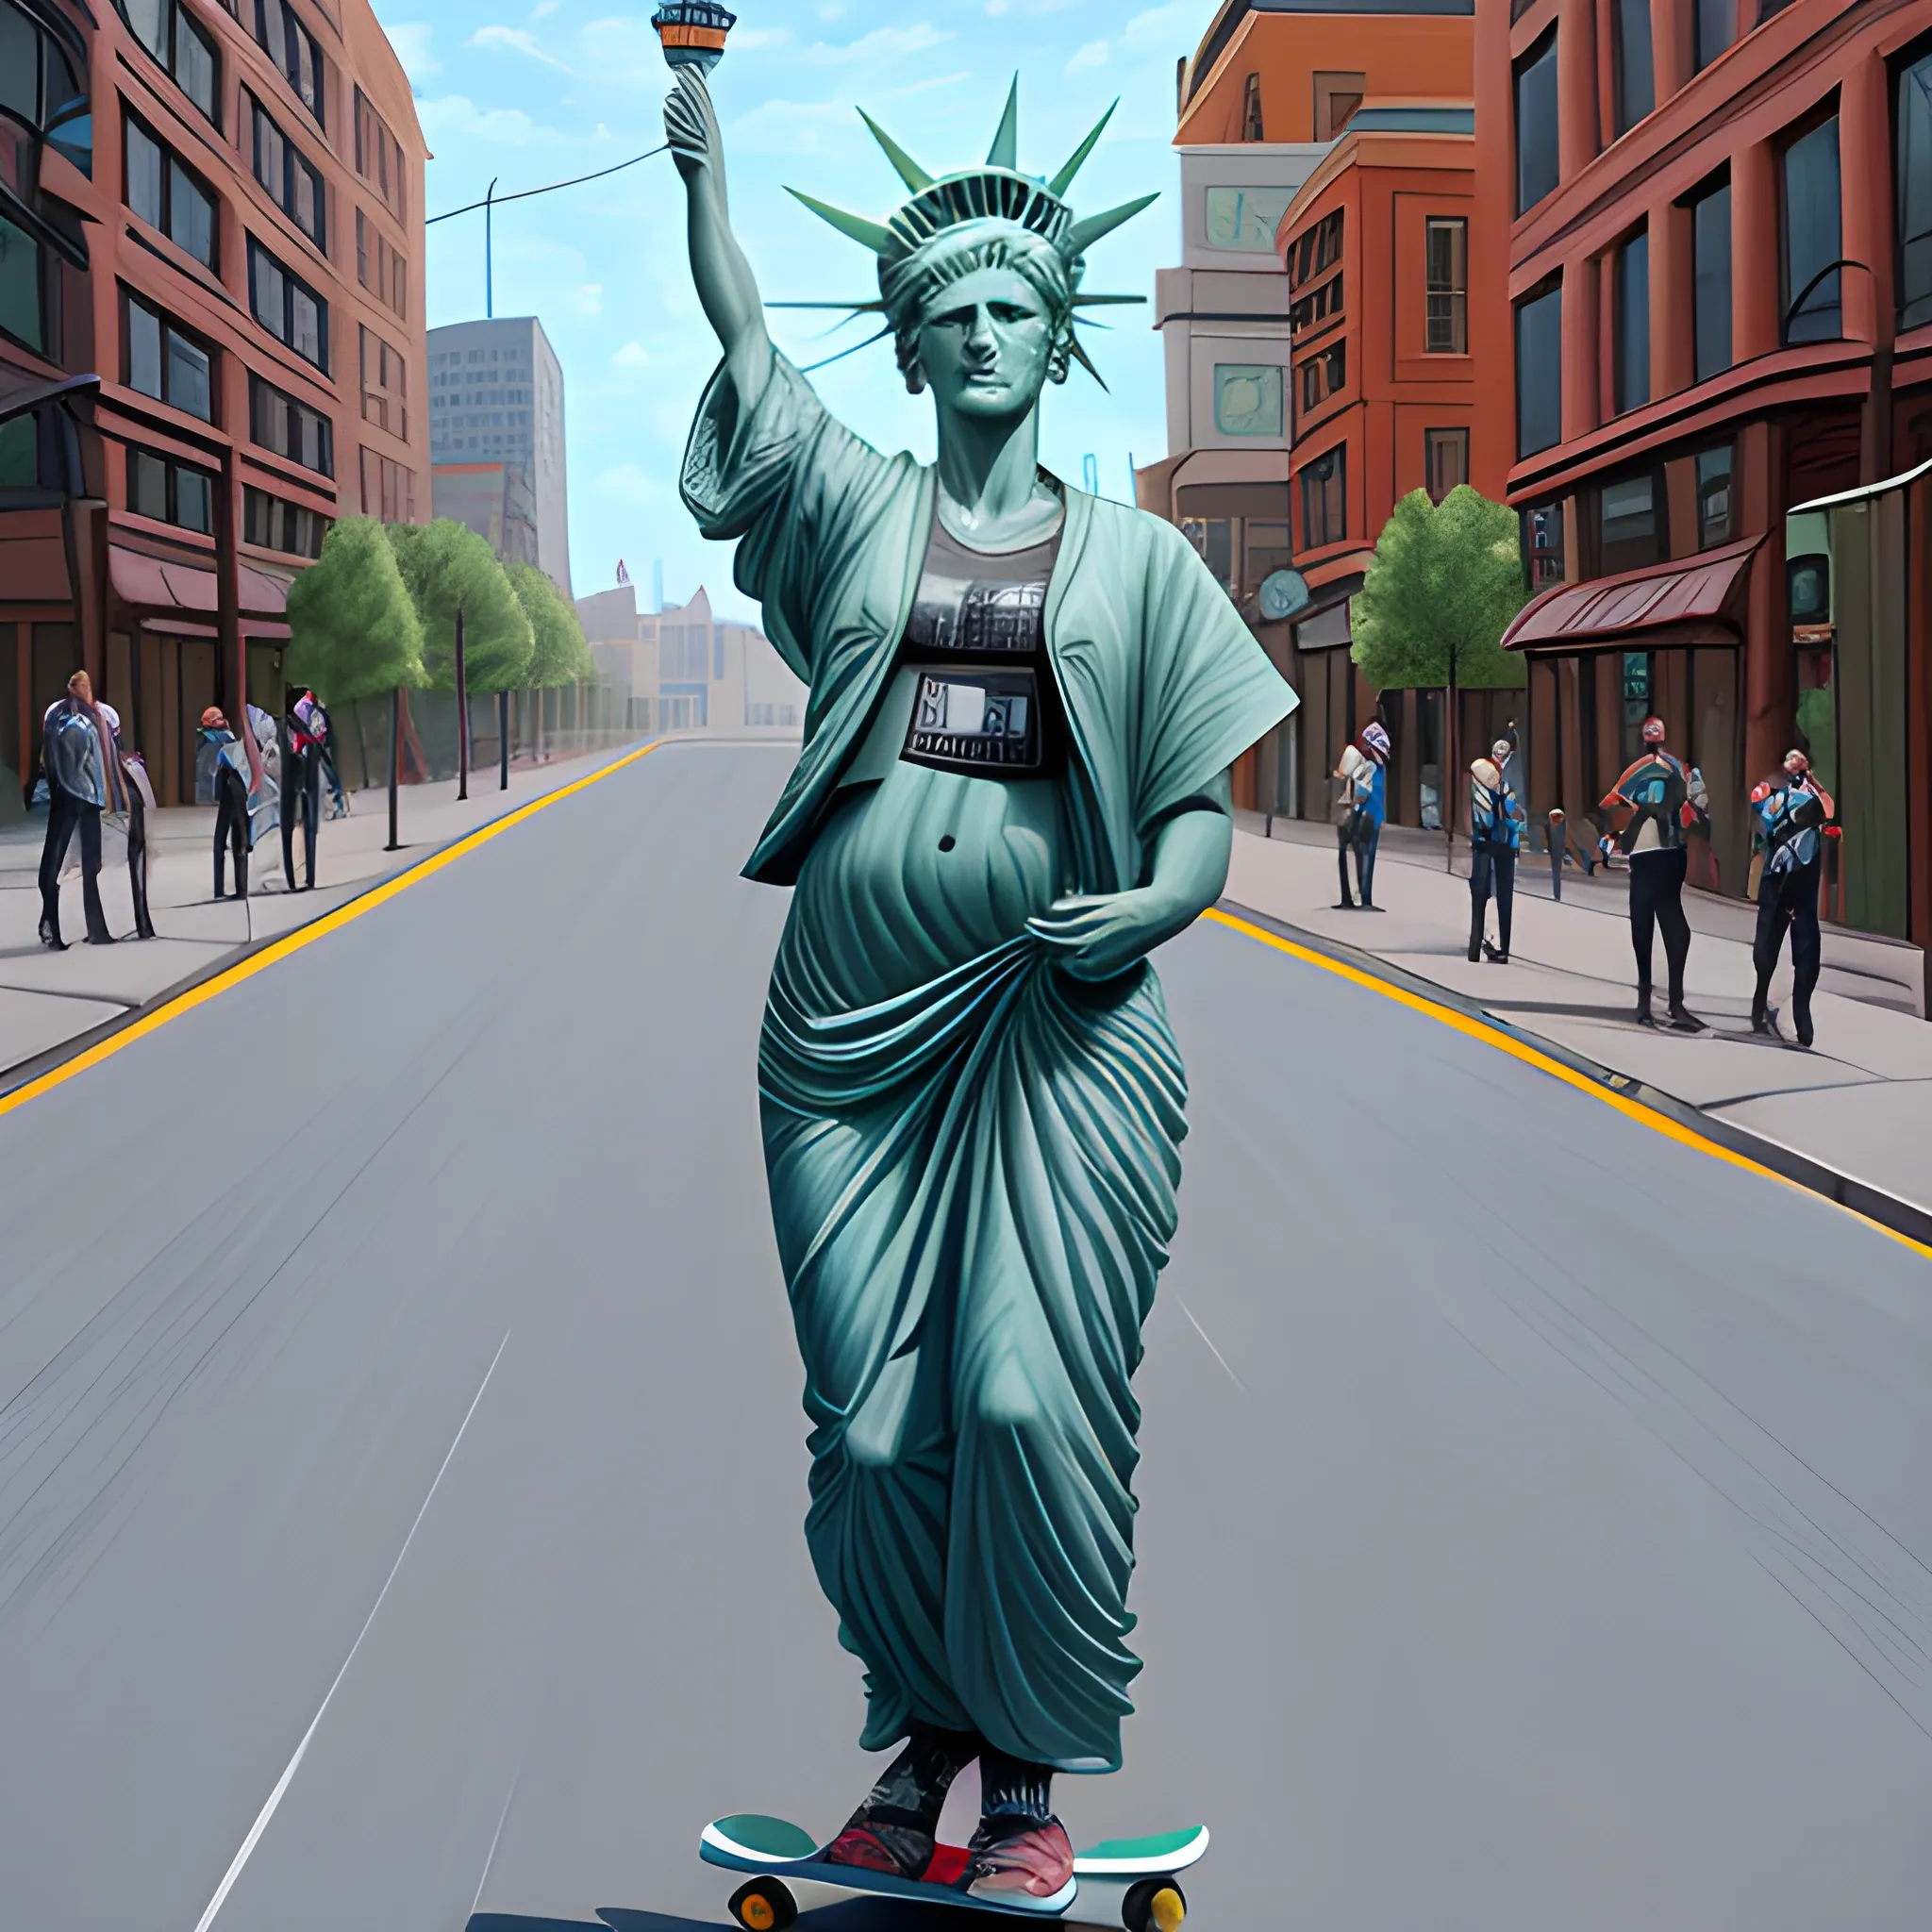 An androgynous Statue of Liberty riding a skateboard down an urban street, with a mohawk hairstyle, smoking a joint, carrying a gun, and wearing a Bitcoin half-shirt, photo realistic oil painting